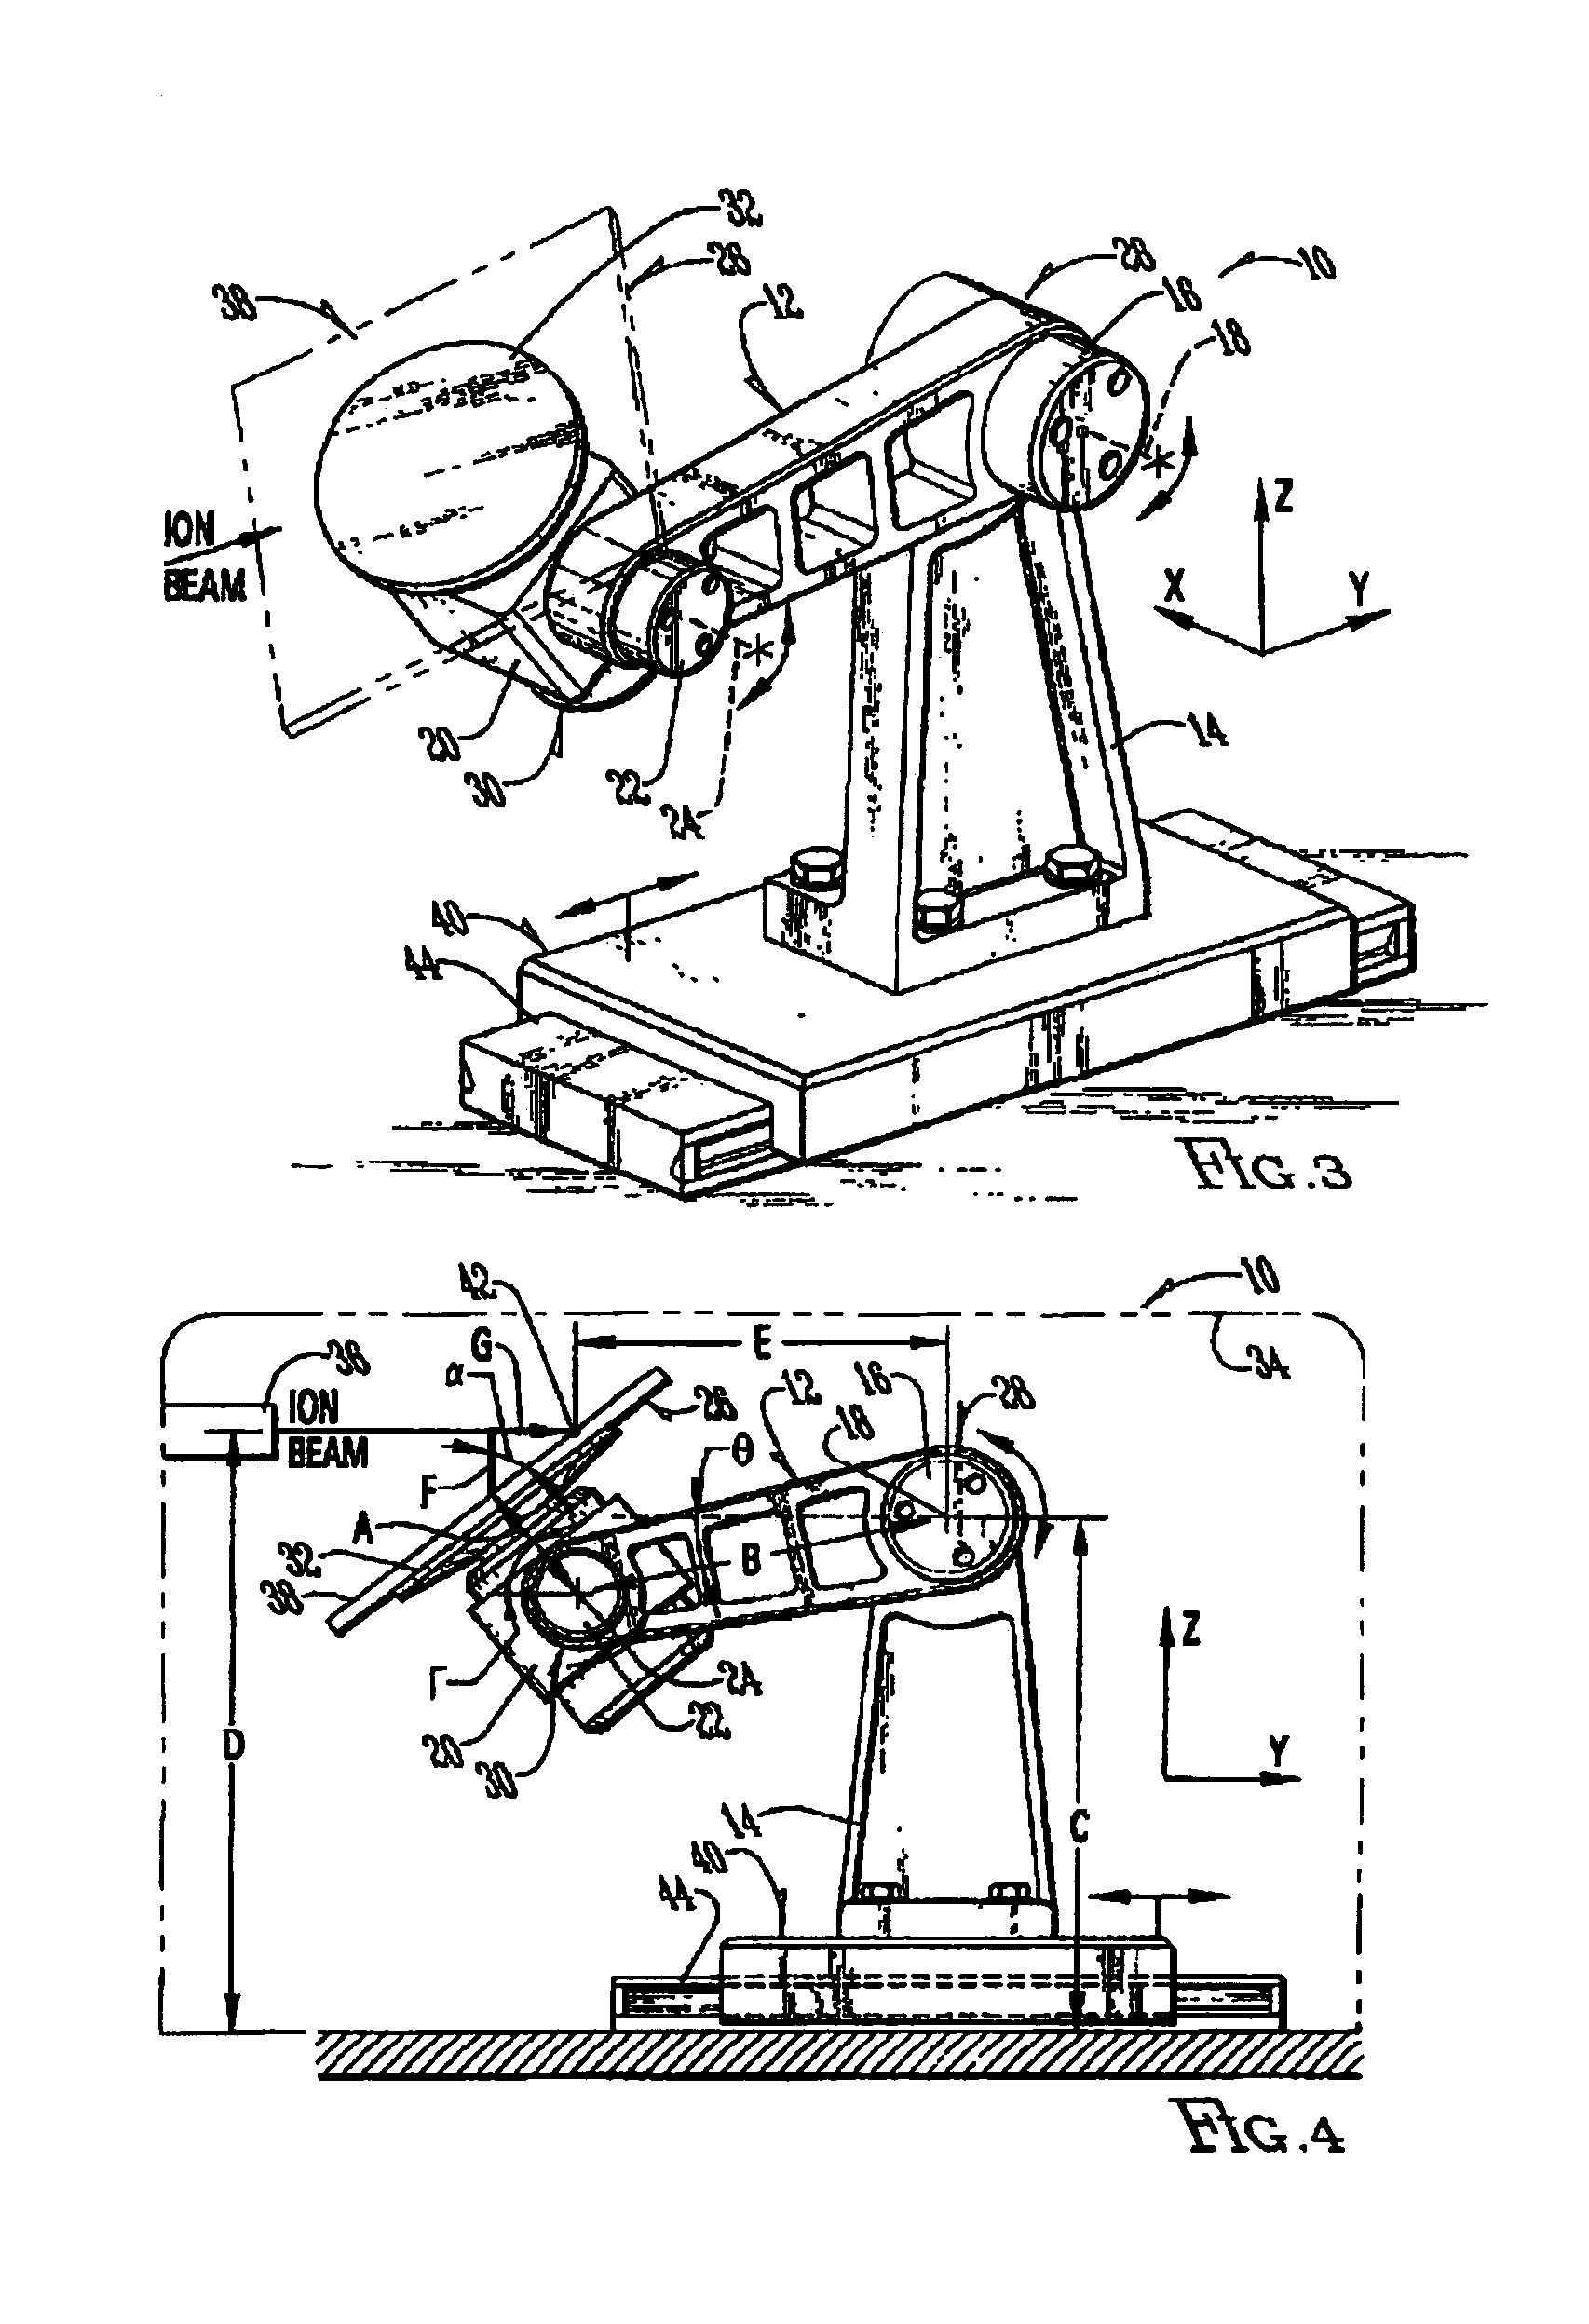 Substrate positioning system